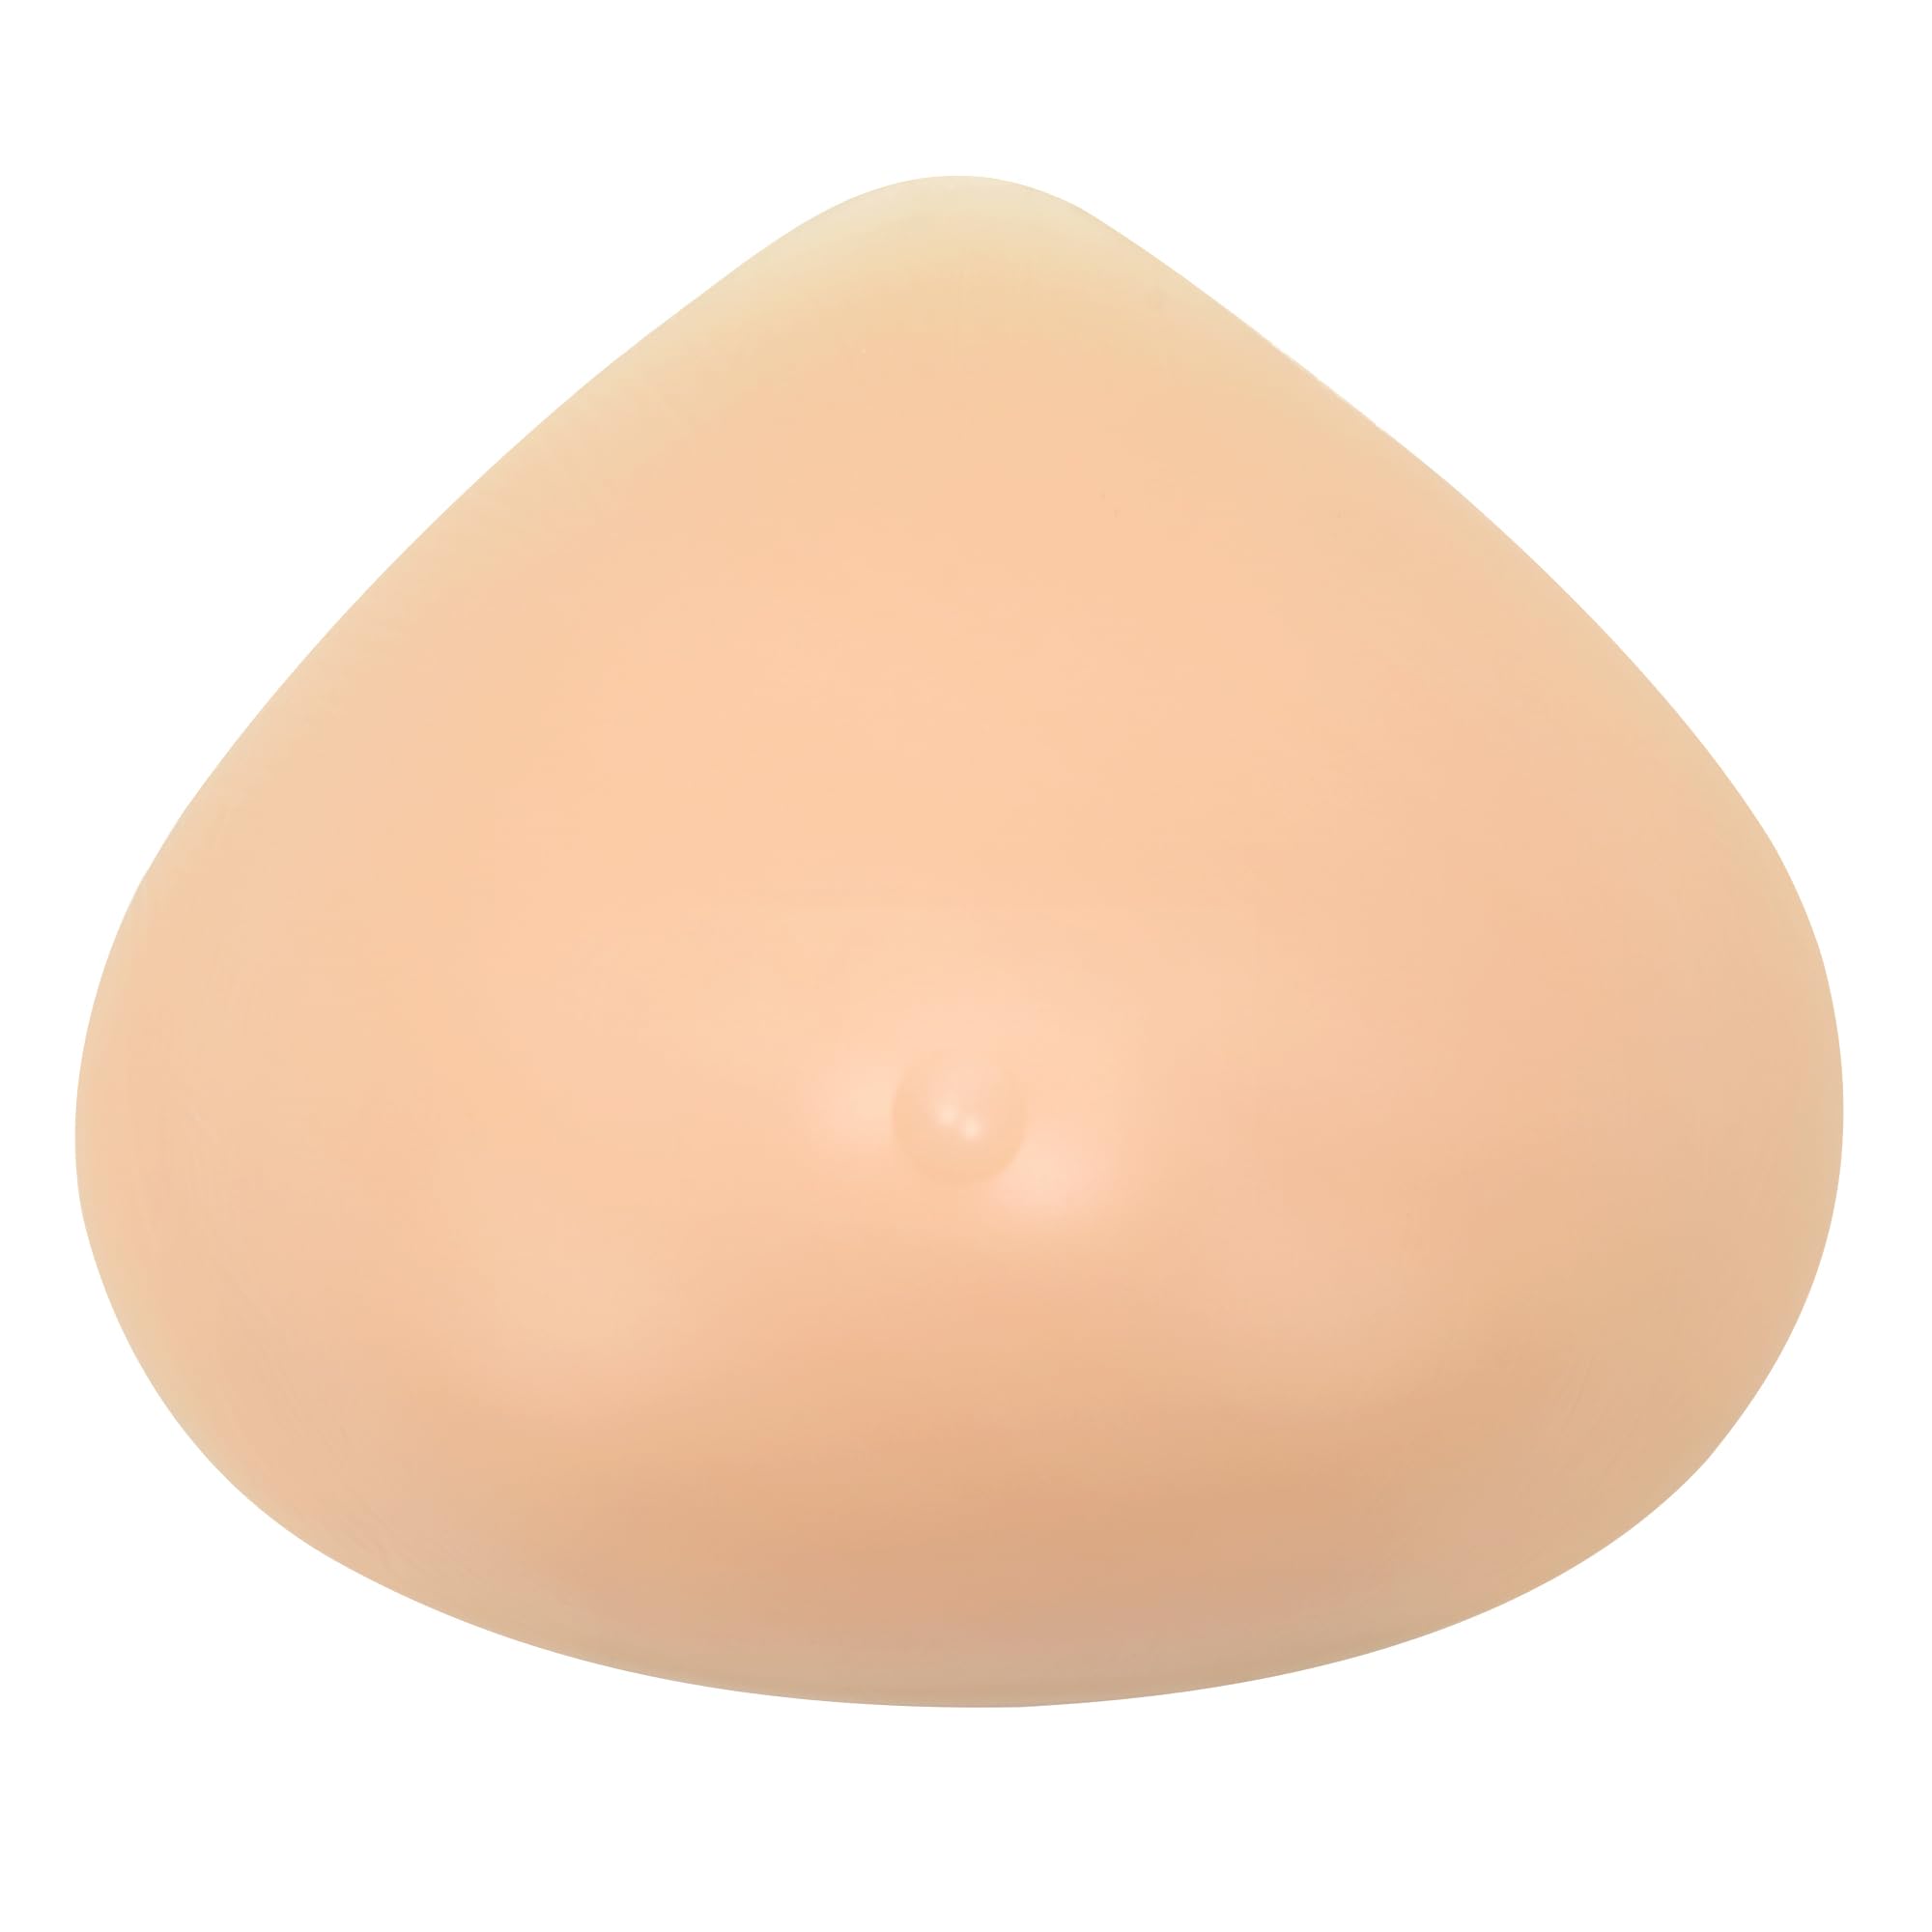 MERSTEYO Silicone Breast Form Triangle Mastectomy Prosthesis Concave Bra Insert Enhancer Pad 1 Piece 300g